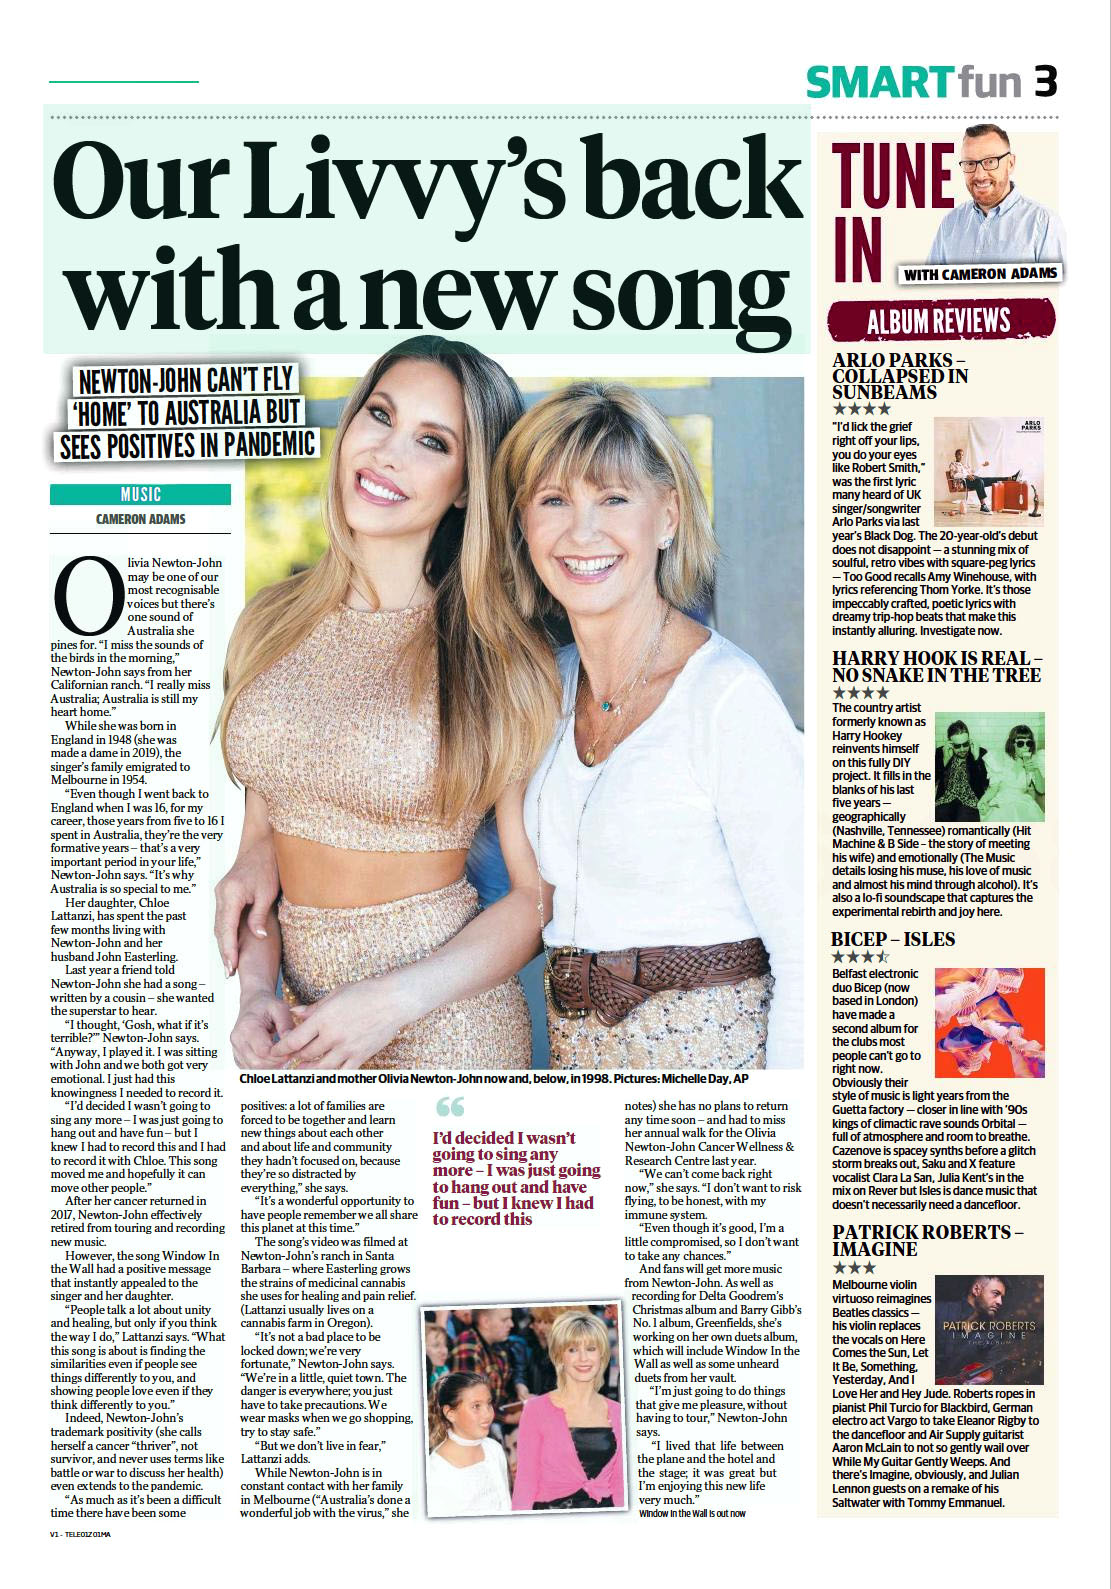 Our Livvy's back with a new song - Daily Telegraph